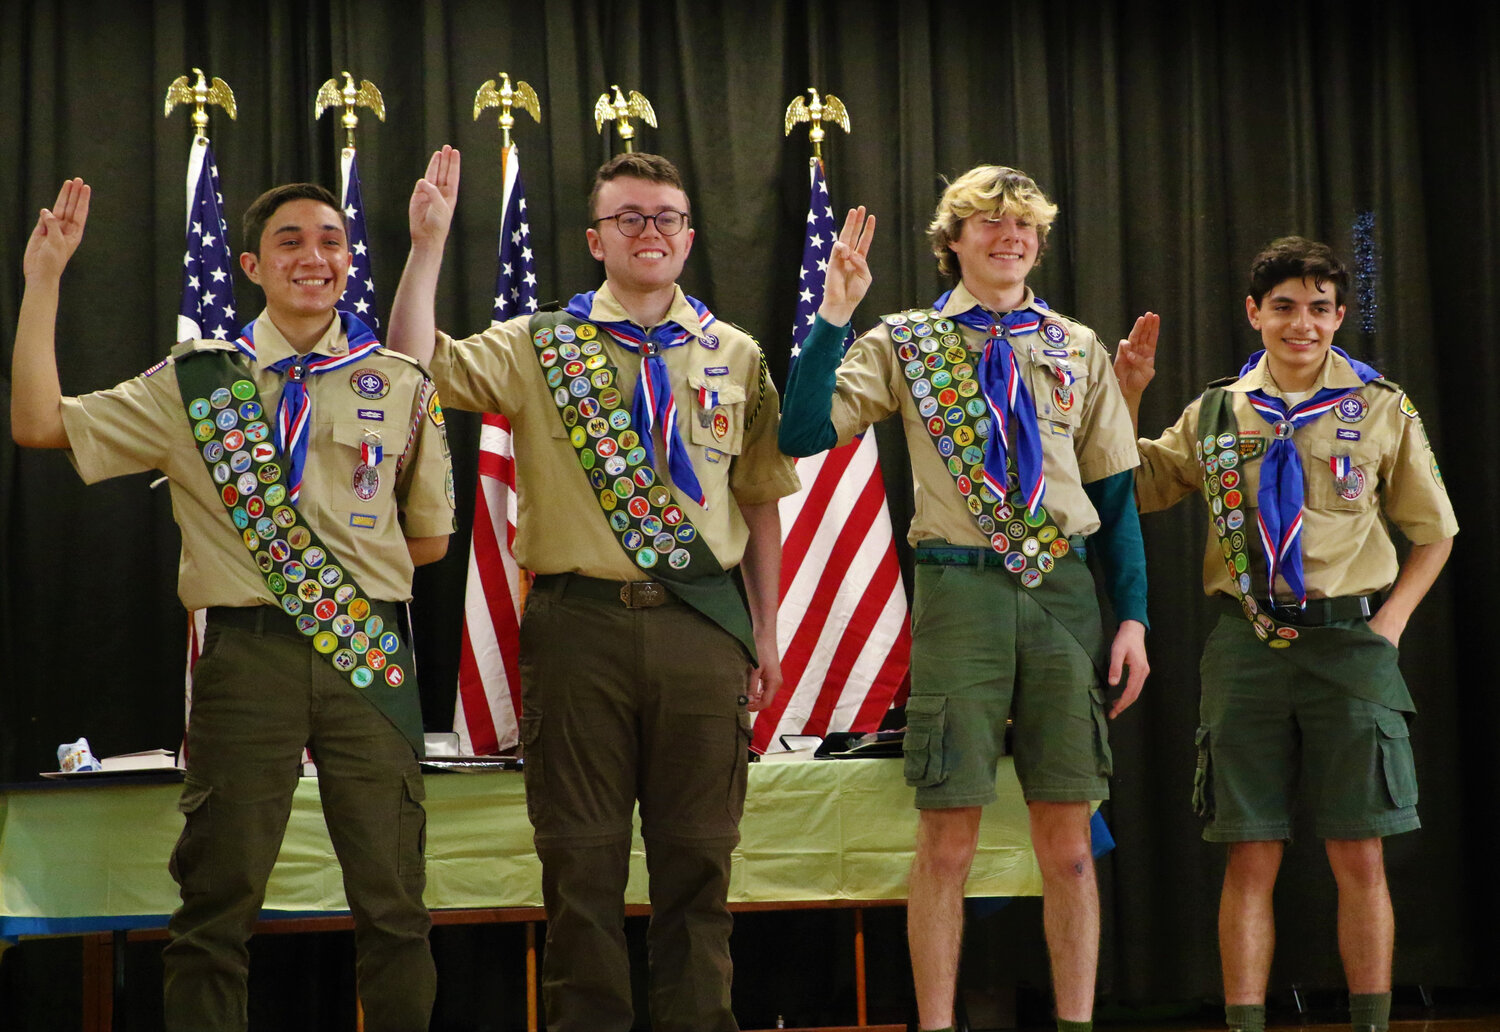 Newly-minted Eagle Scouts Andrew Schiller, left, Ethan Palacio, Robert Munafo, and Lucas Colonna at the Eagle Court of Honors on May 13.